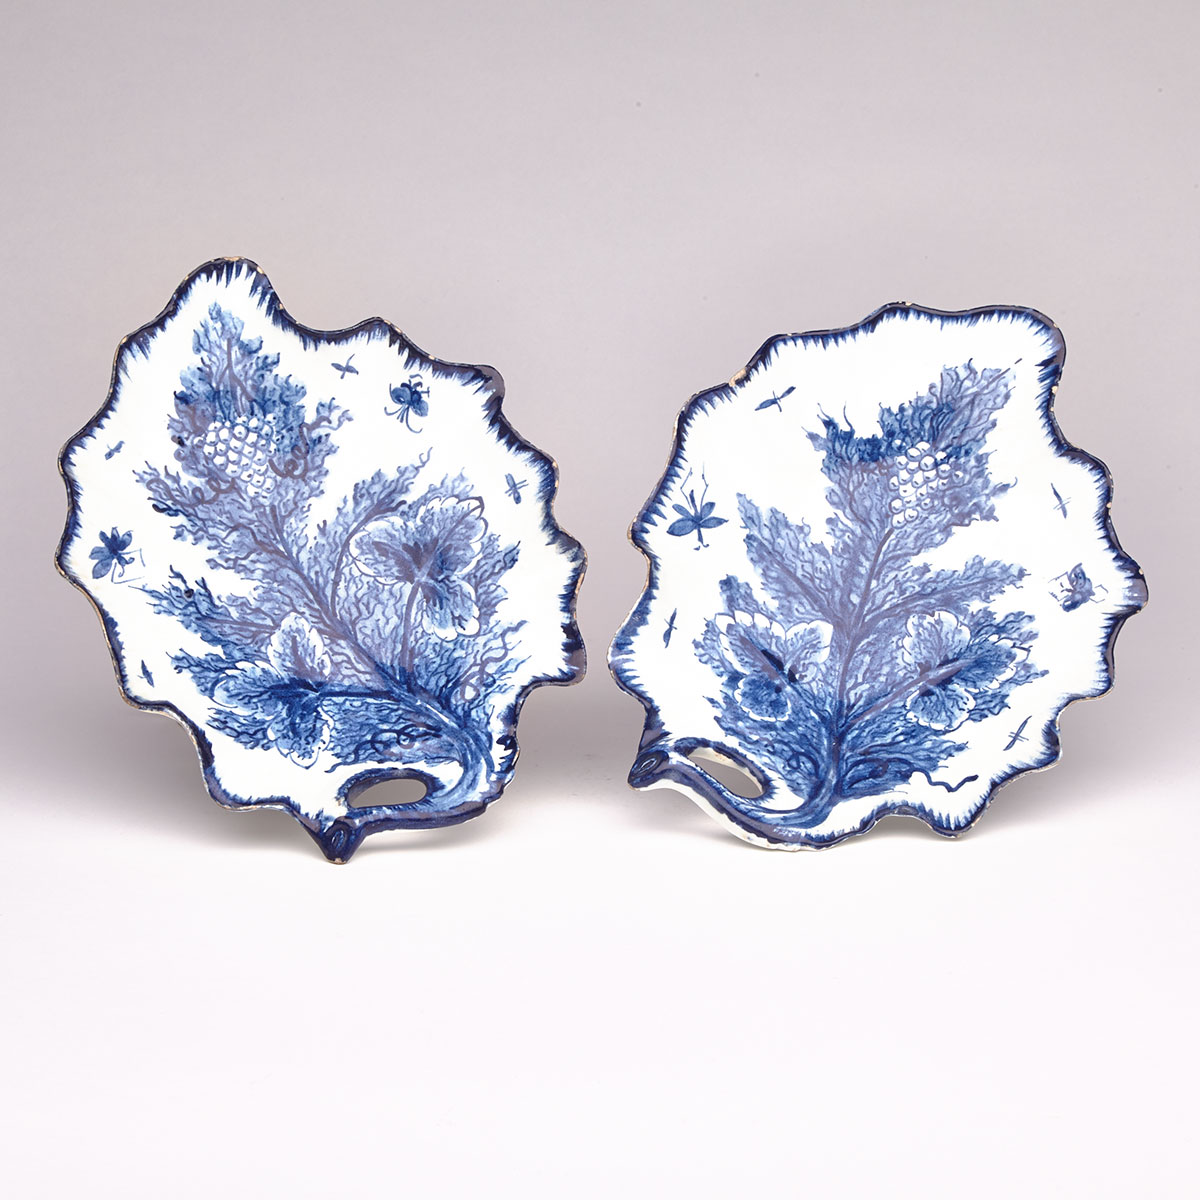 Pair of Bow Leaf Shaped Dishes, c.1765